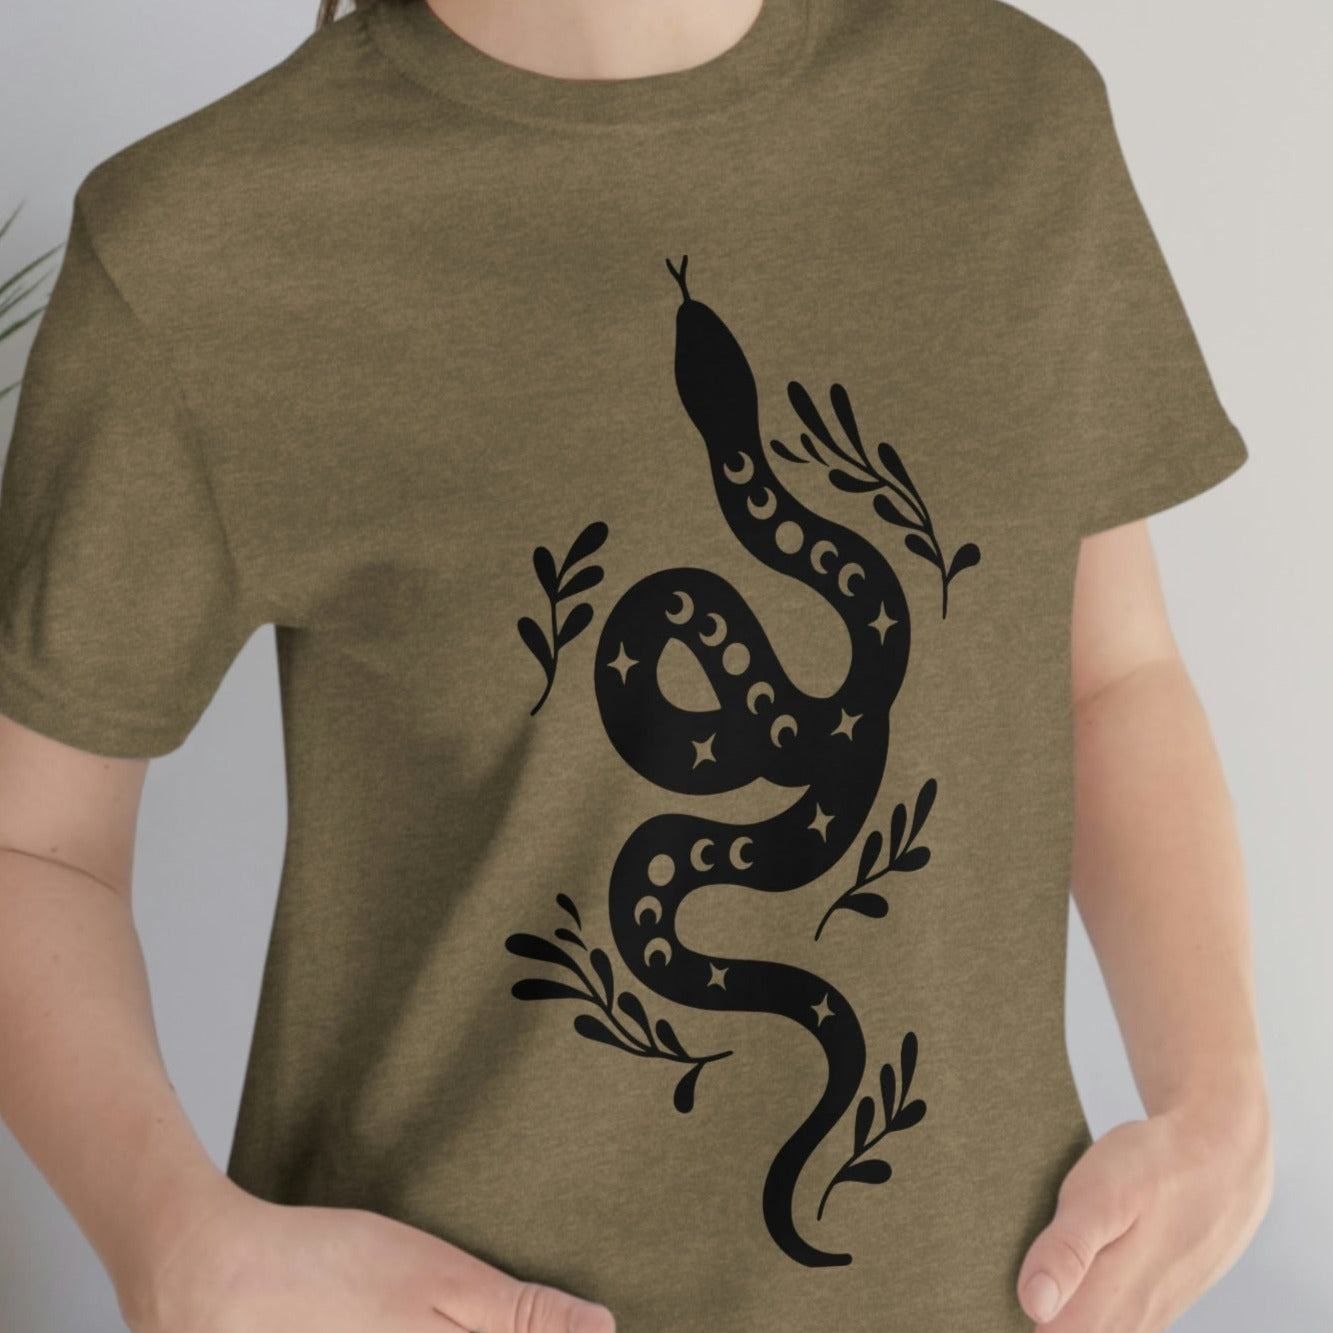 Celestial snake witchy tee for women cotton heathered olive tshirt